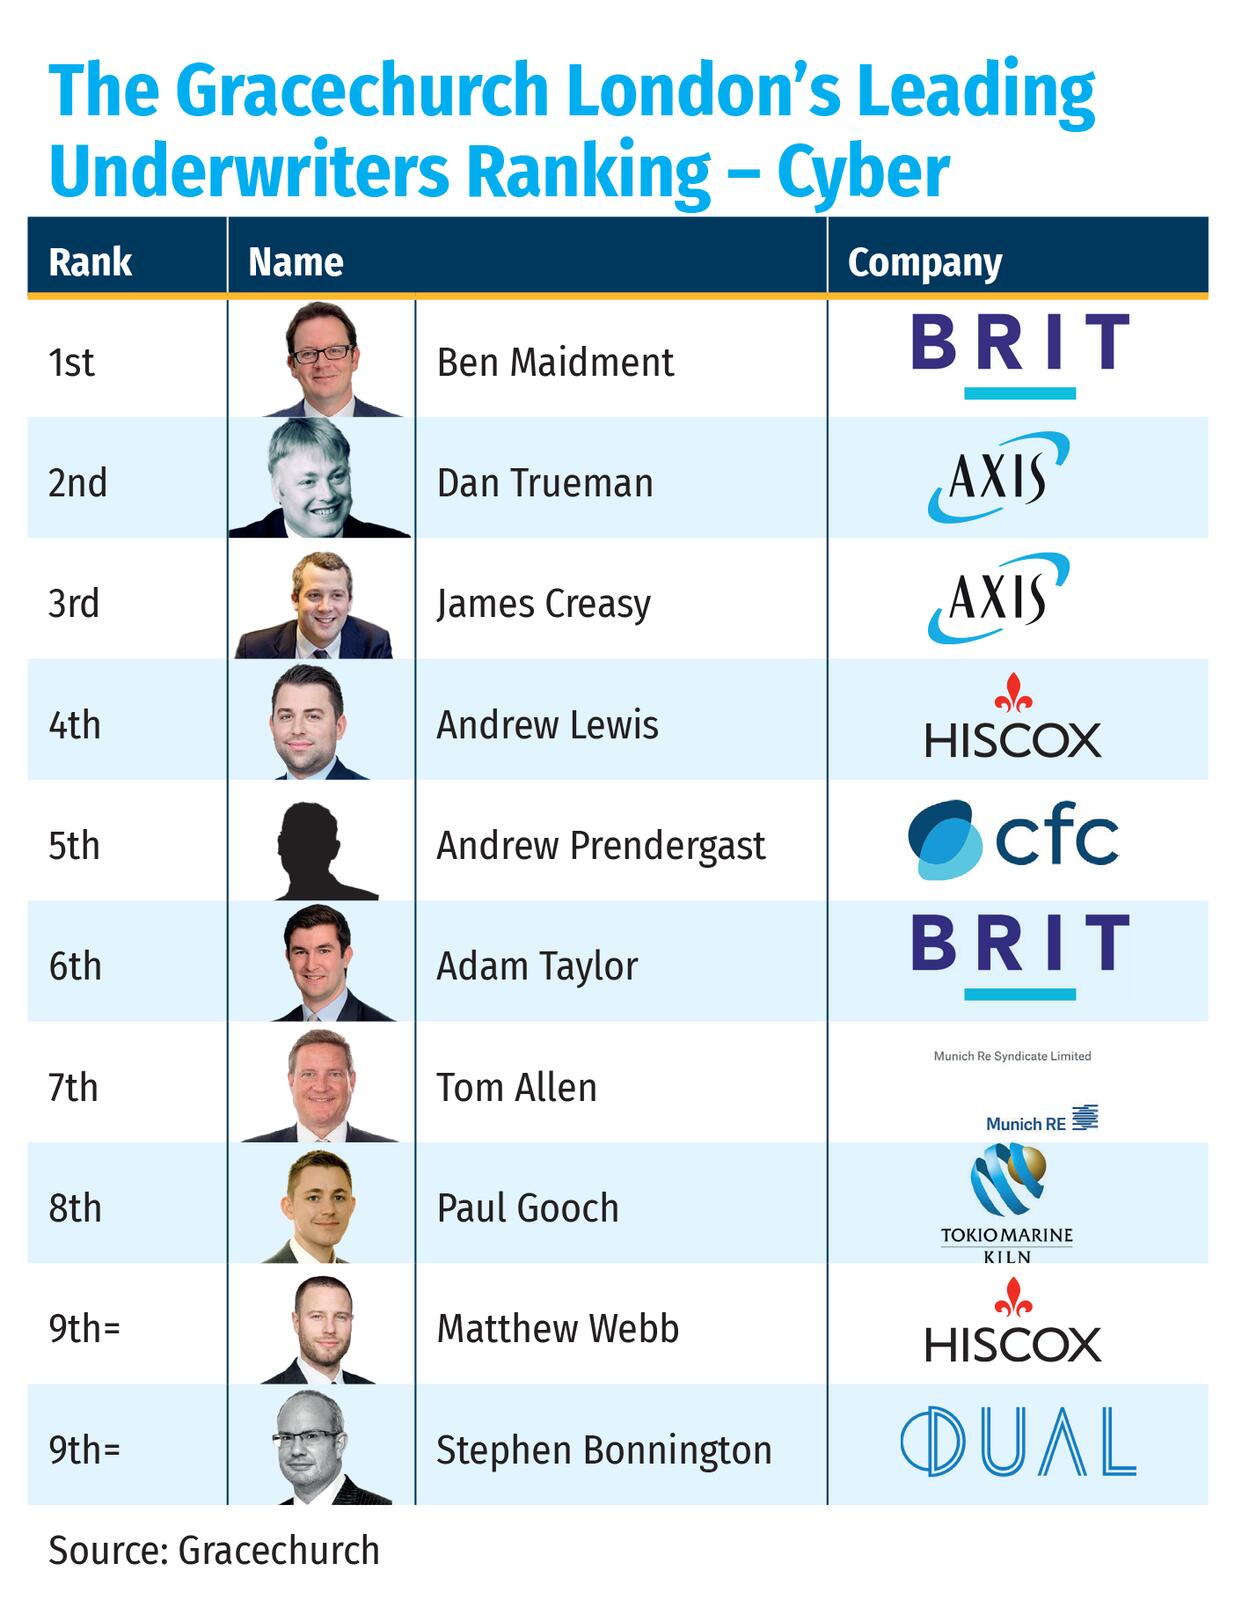 The Gracechurch London’s Leading Underwriters Ranking – Cyber